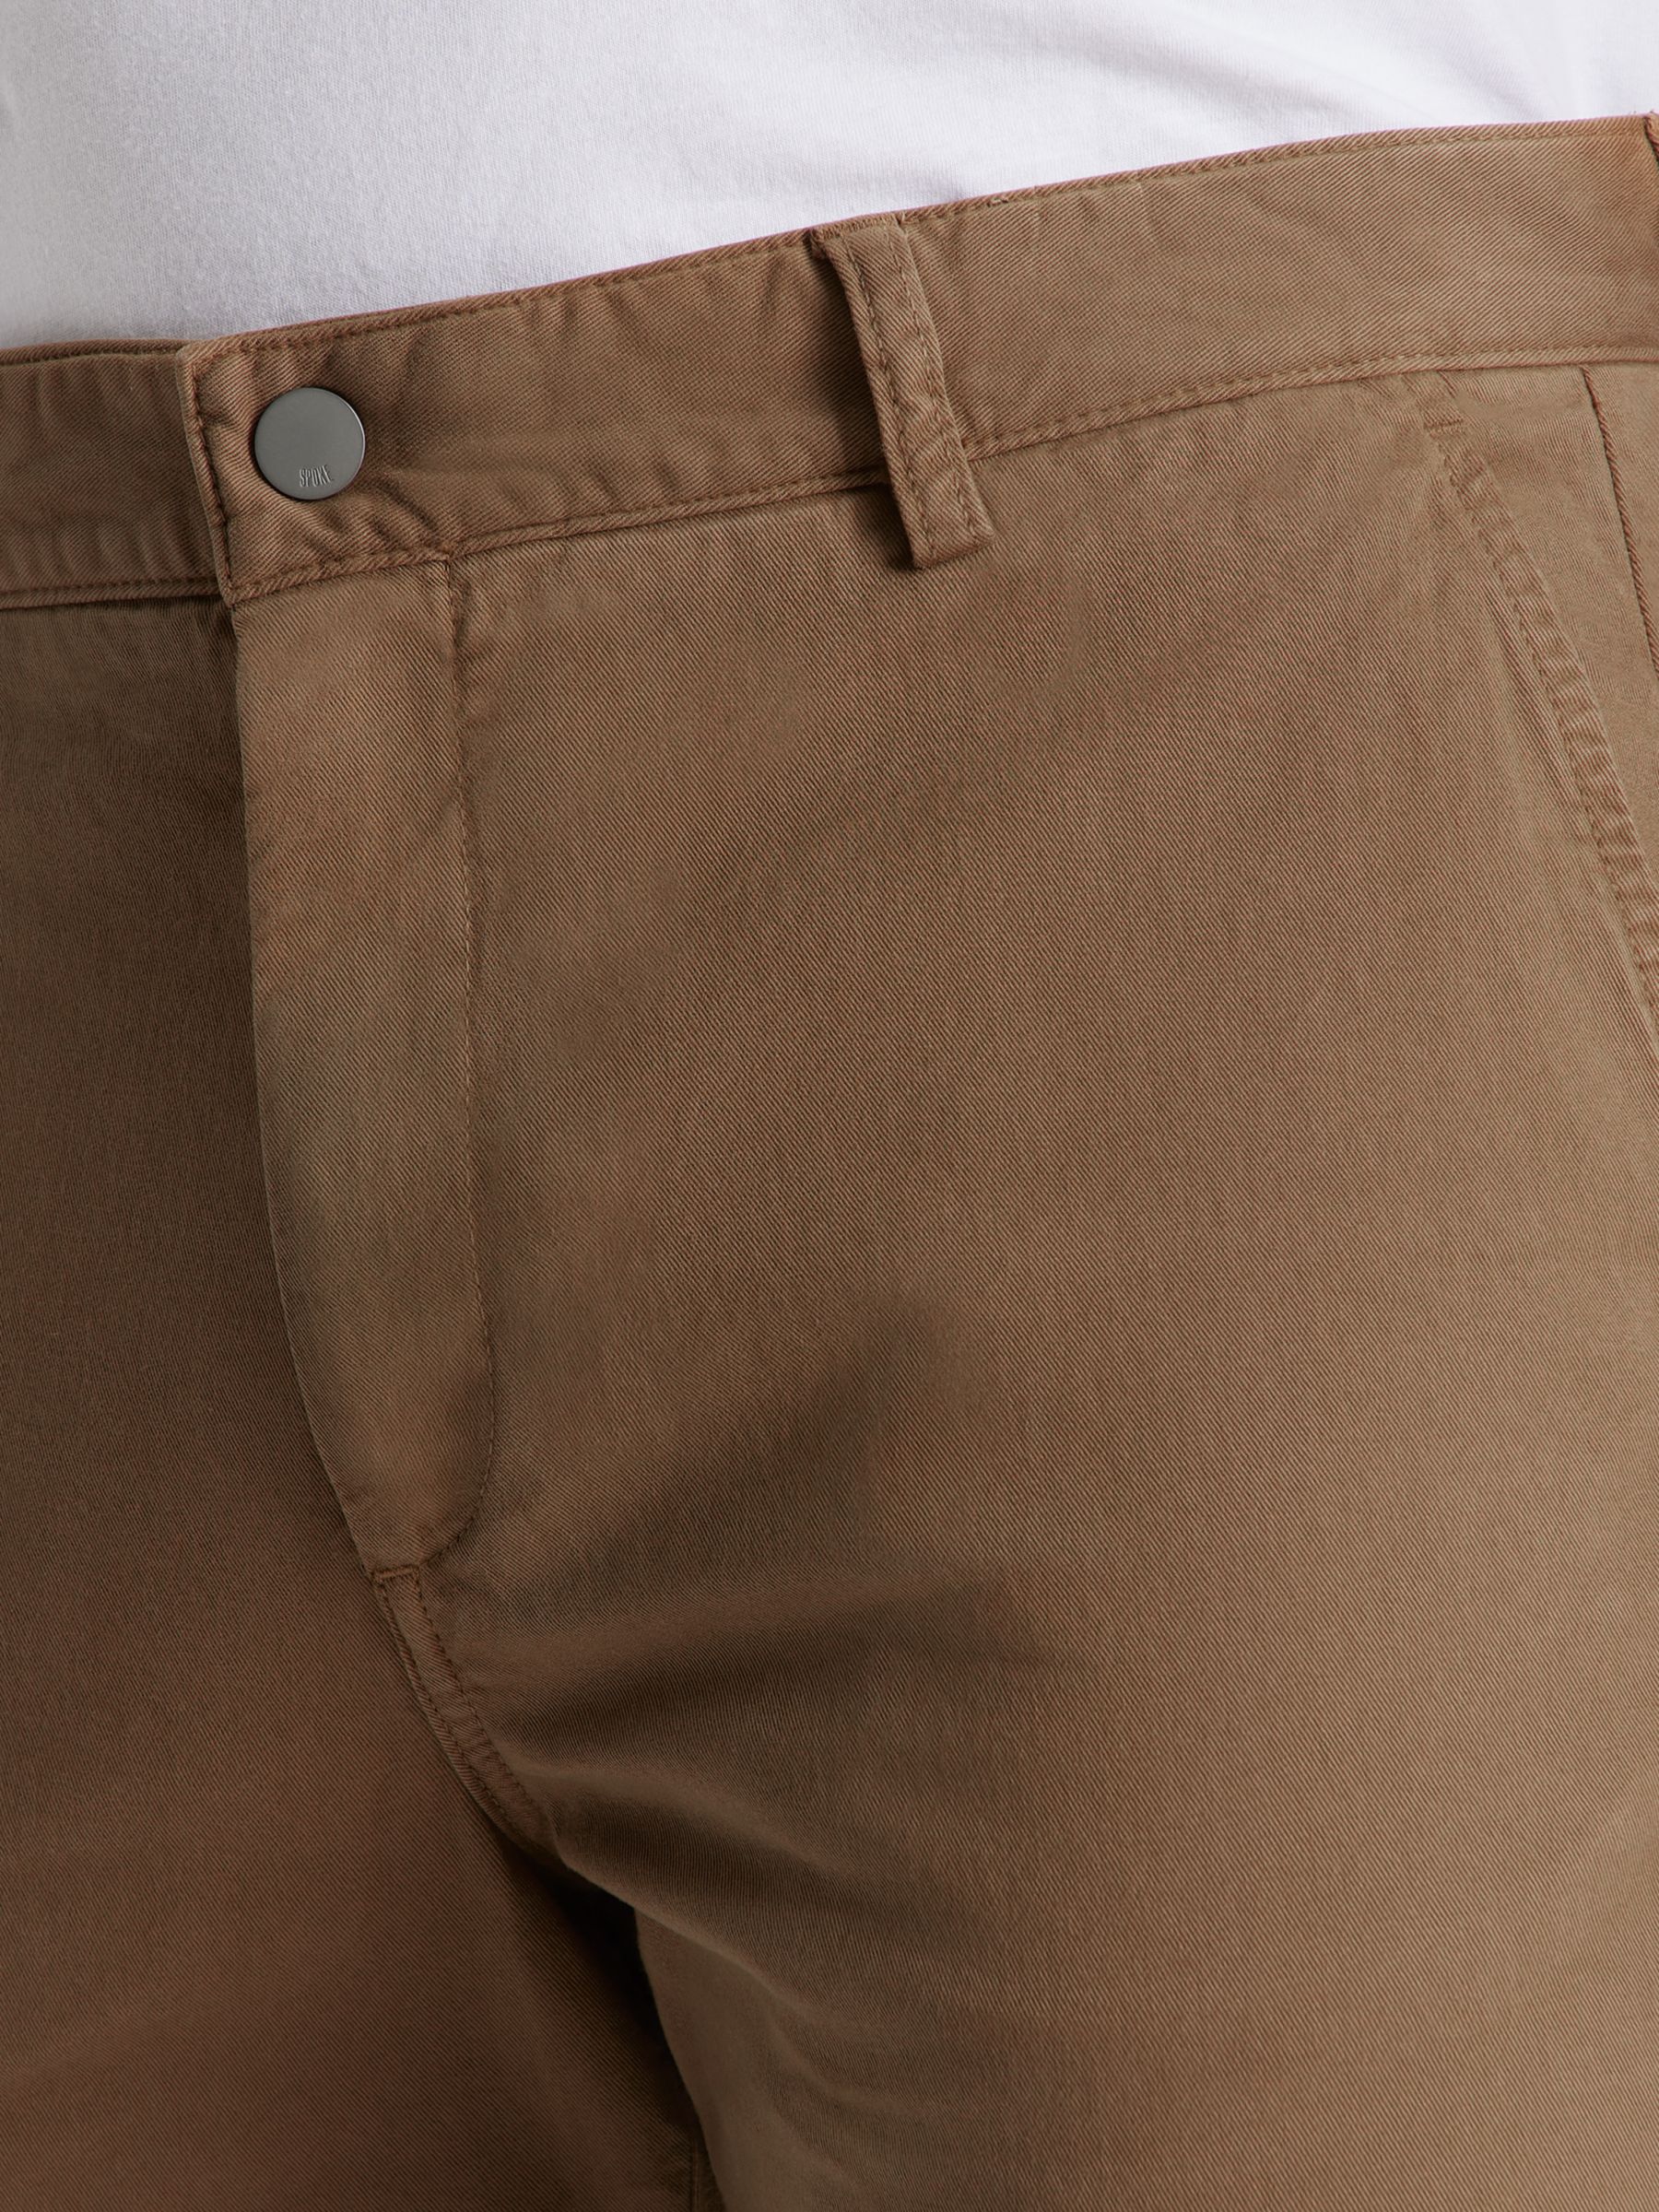 Buy SPOKE Heroes Cotton Blend Narrow Thigh Chinos Online at johnlewis.com